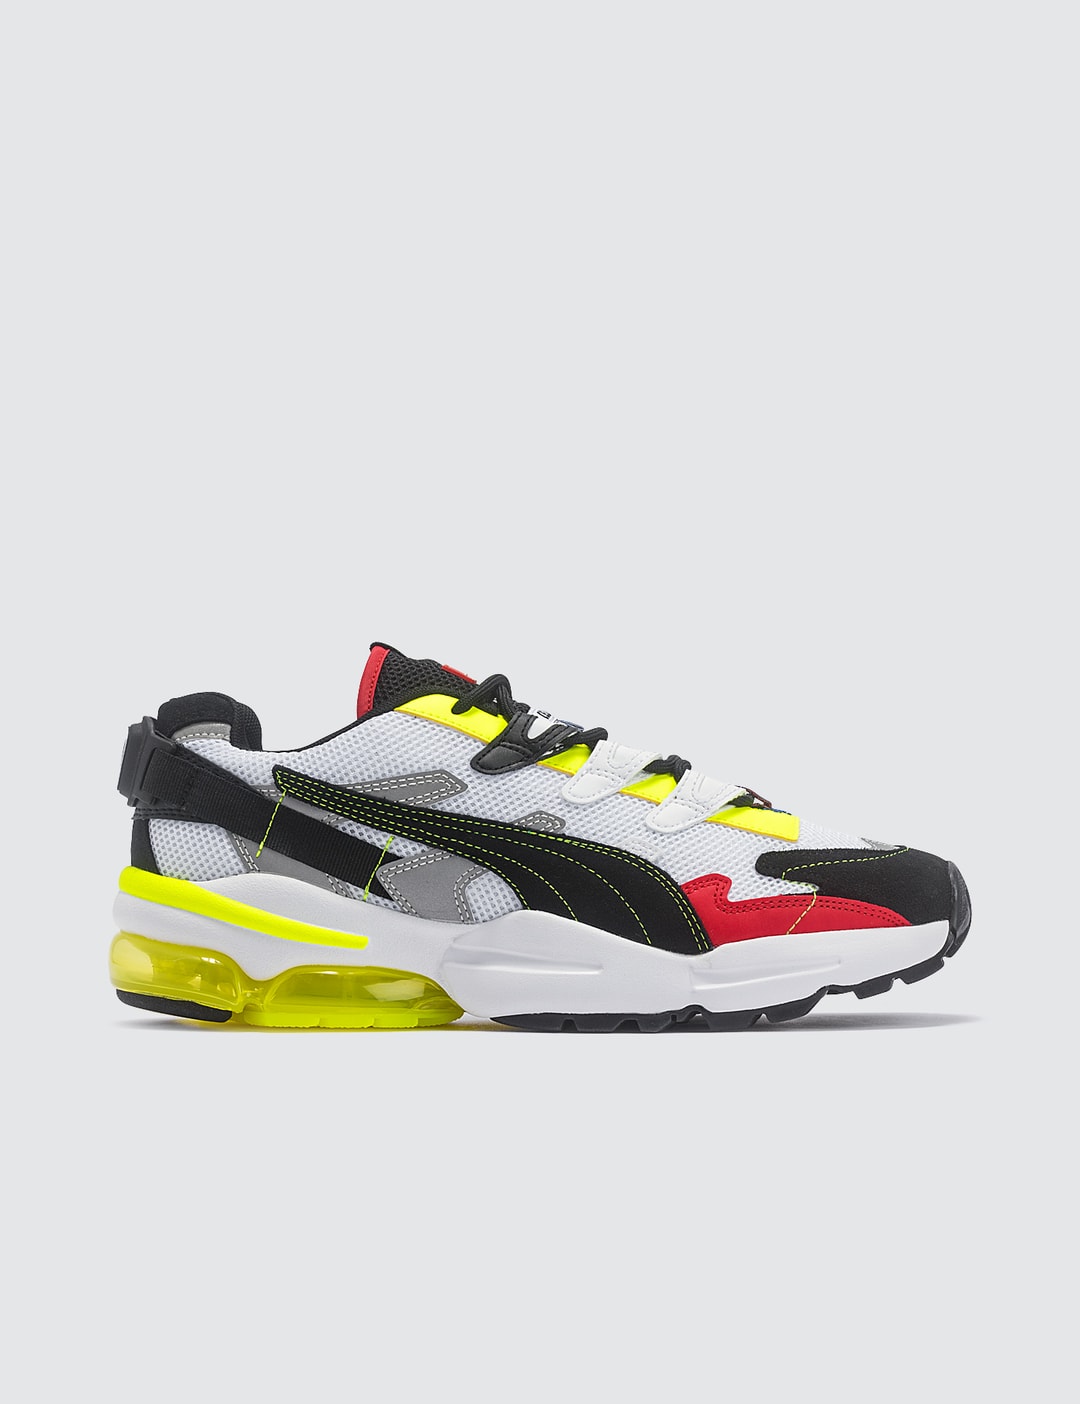 Ader Error X Puma Cell Alien Sneakers Placeholder Image